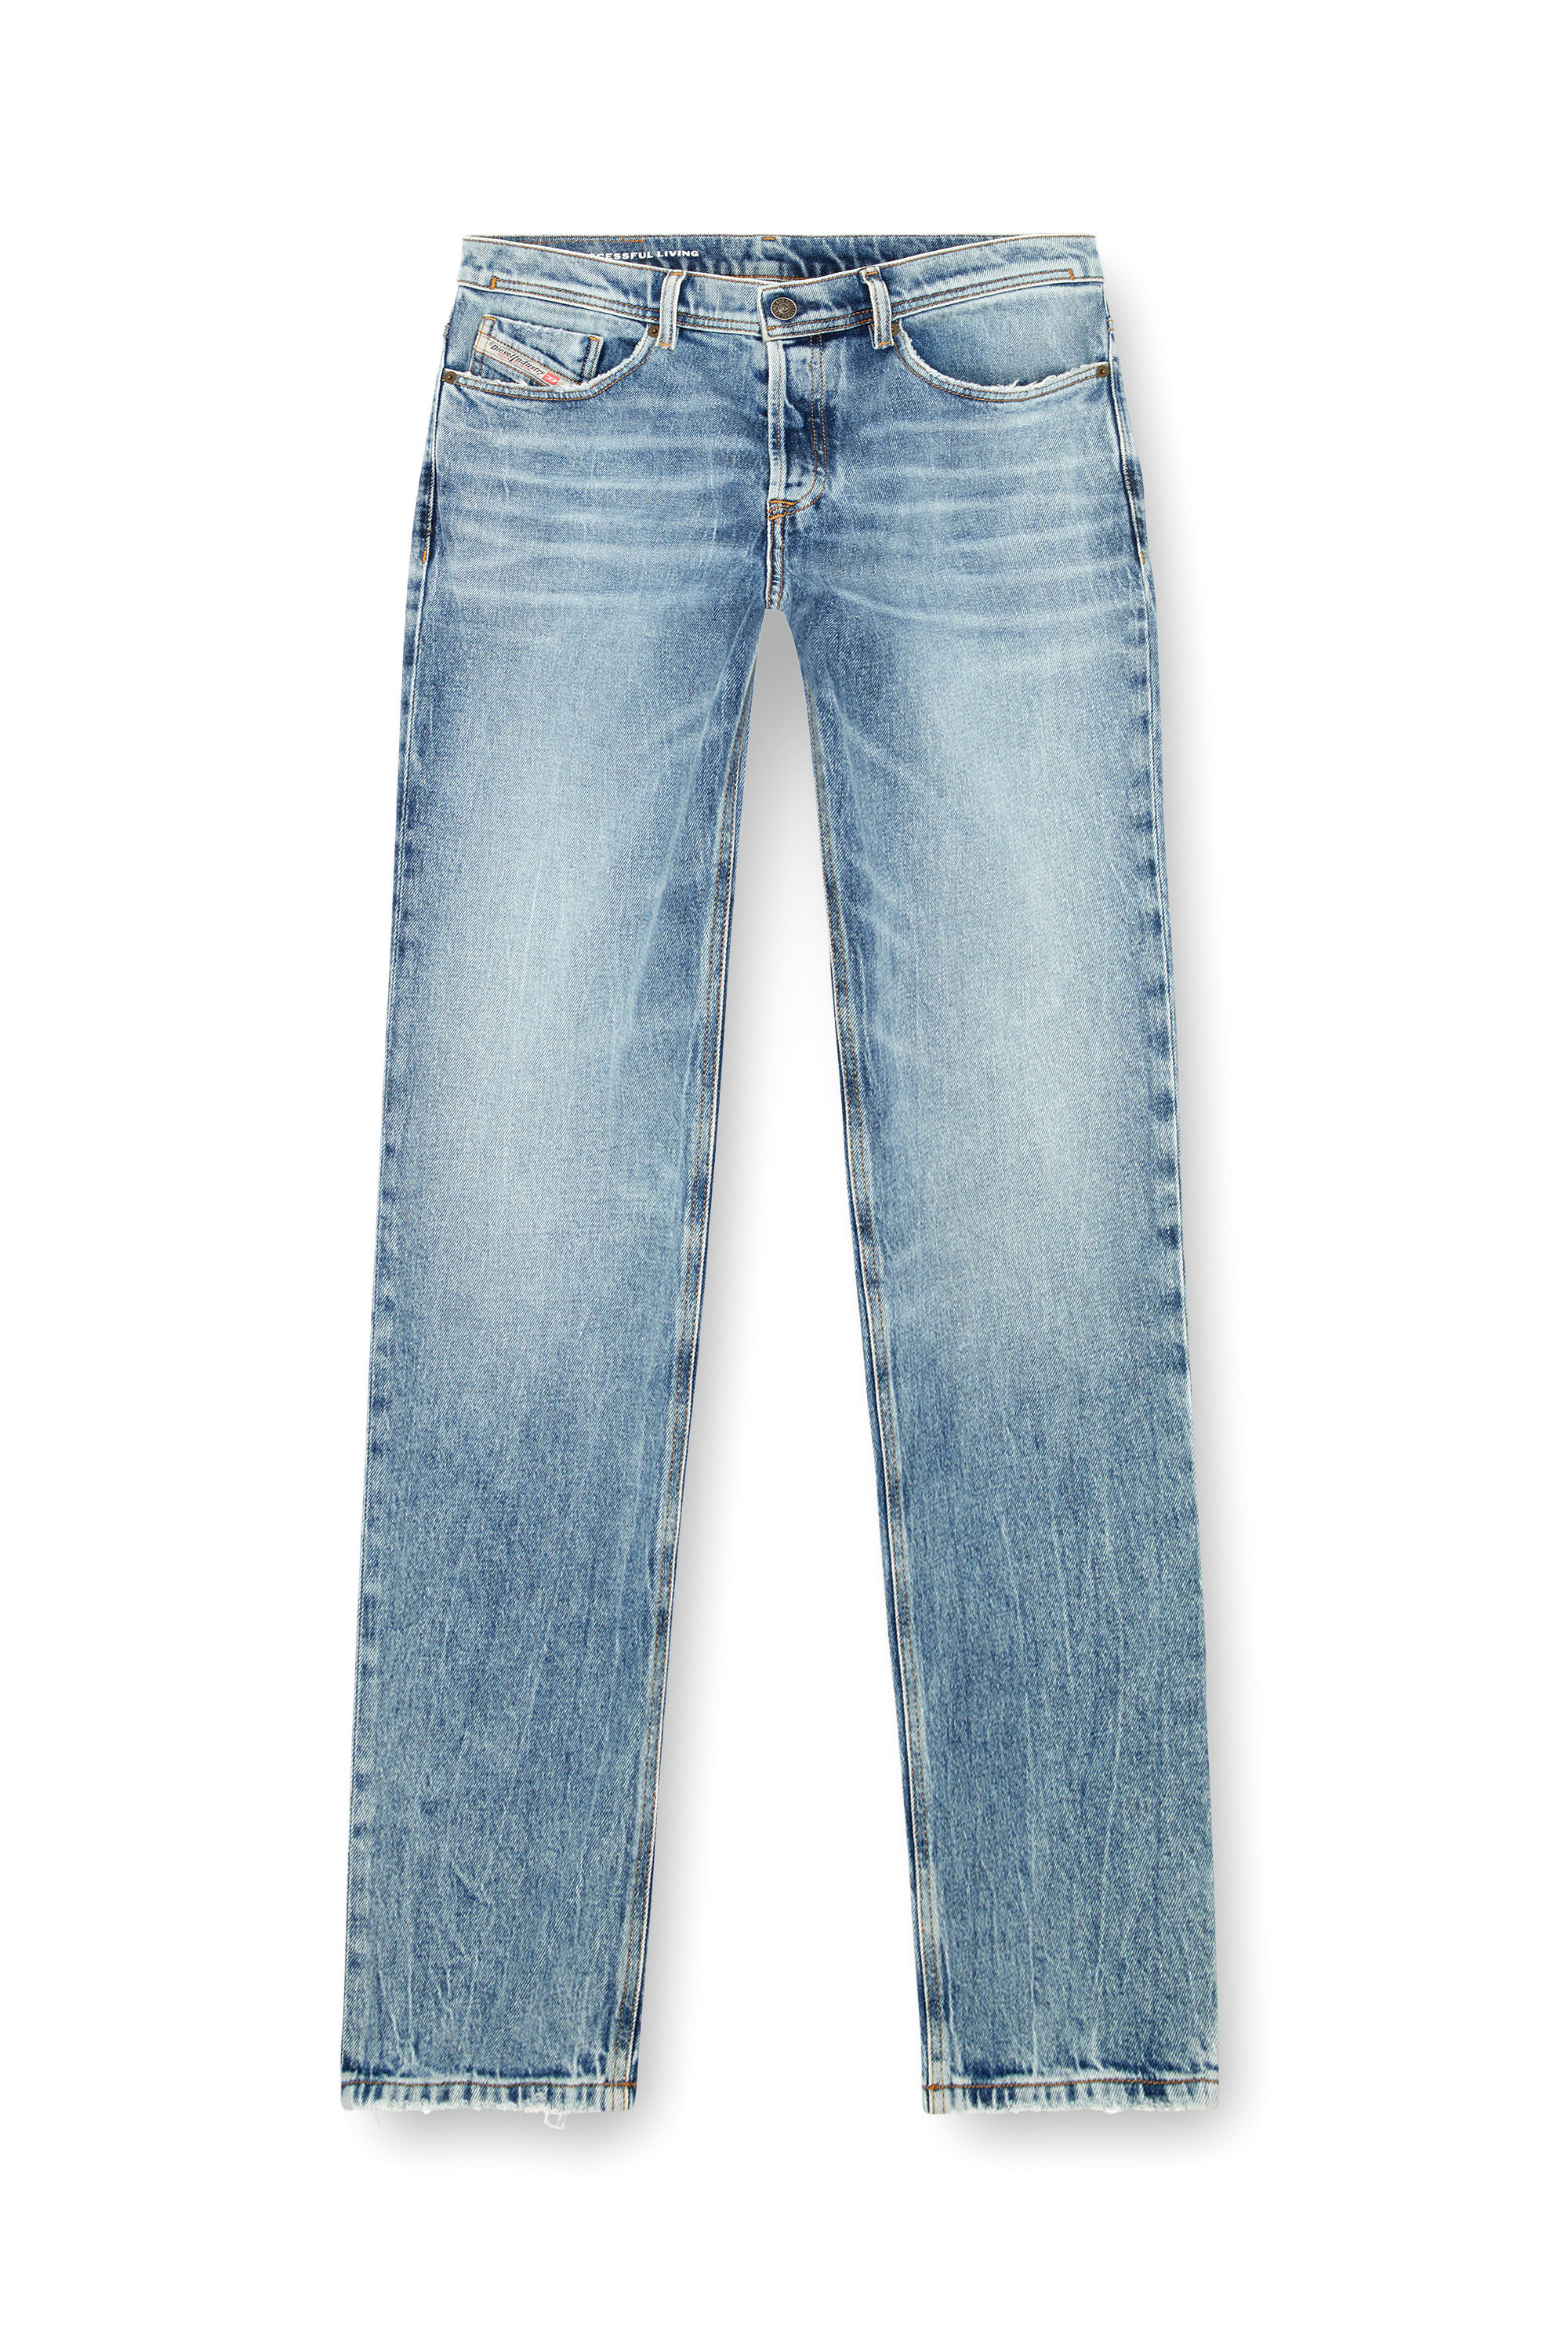 Diesel - Tapered Jeans 2023 D-Finitive 09J54, Hombre Tapered Jeans - 2023 D-Finitive in Azul marino - Image 5